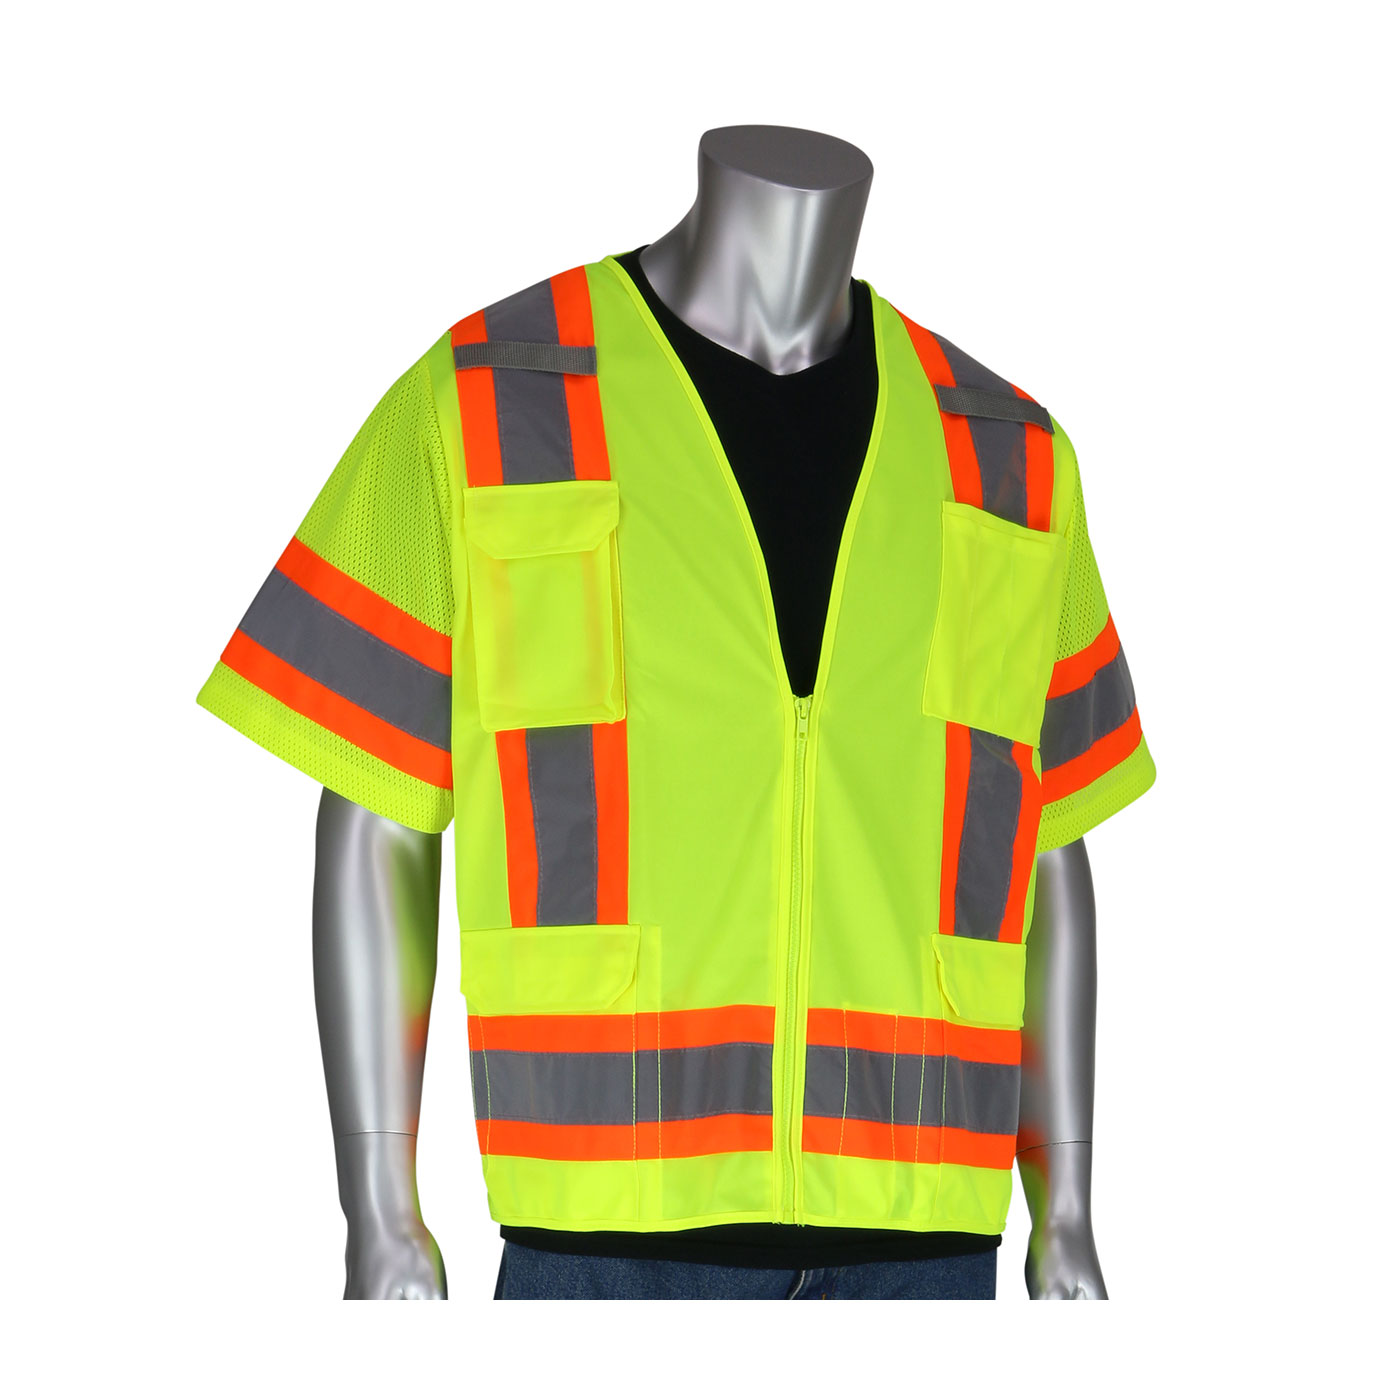 PIP 303-0500-LY/L ANSI Type R Class 3 Two-Tone Yellow Surveyor Eleven Pocket Vest - Large PID-3030500LY L